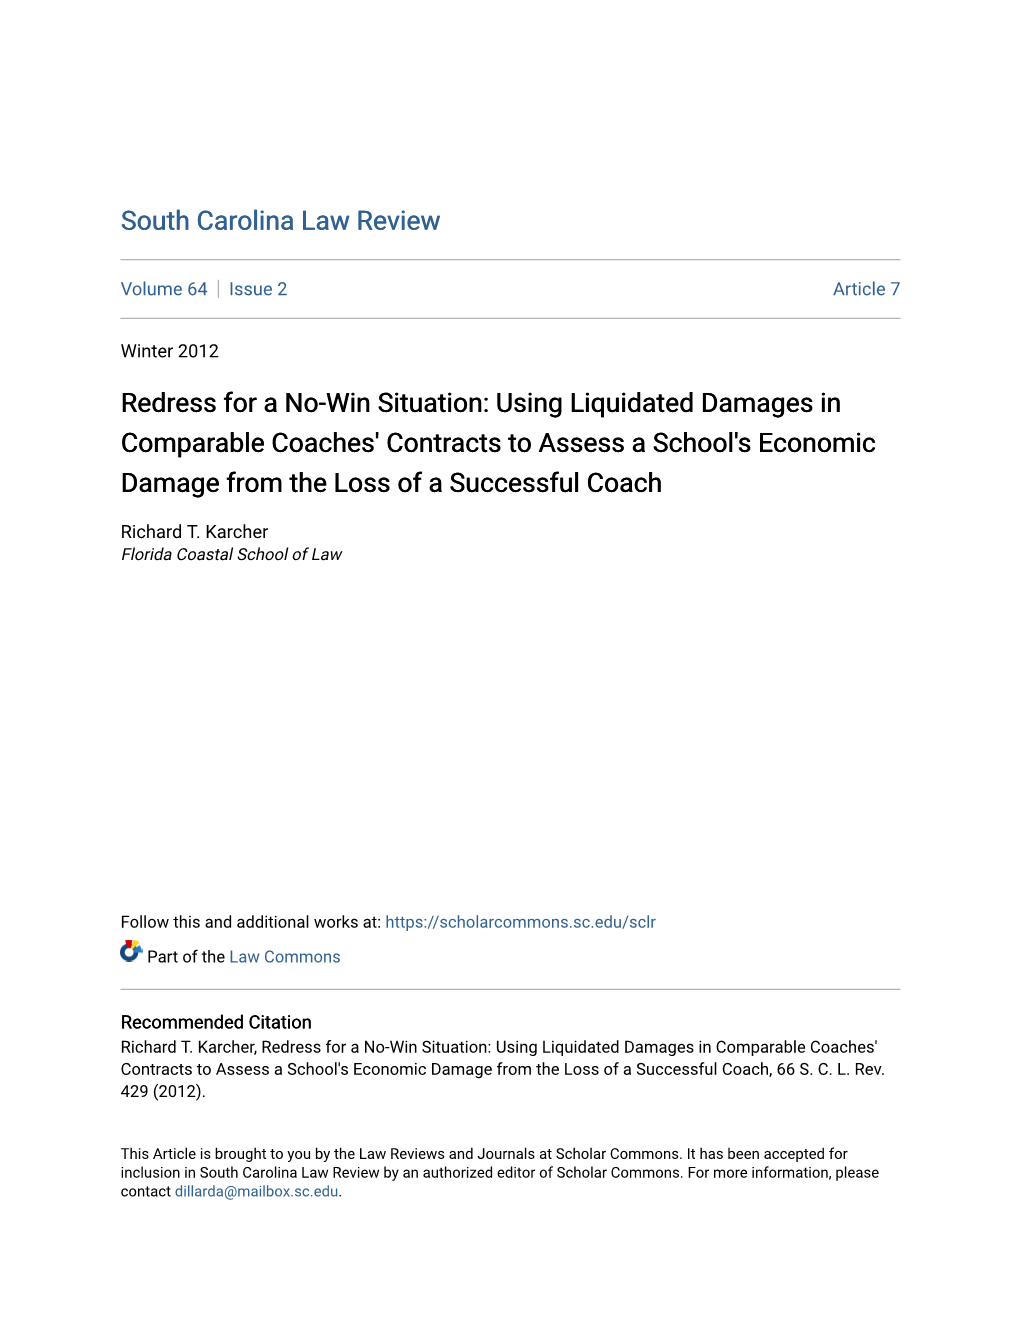 Using Liquidated Damages in Comparable Coaches' Contracts to Assess a School's Economic Damage from the Loss of a Successful Coach